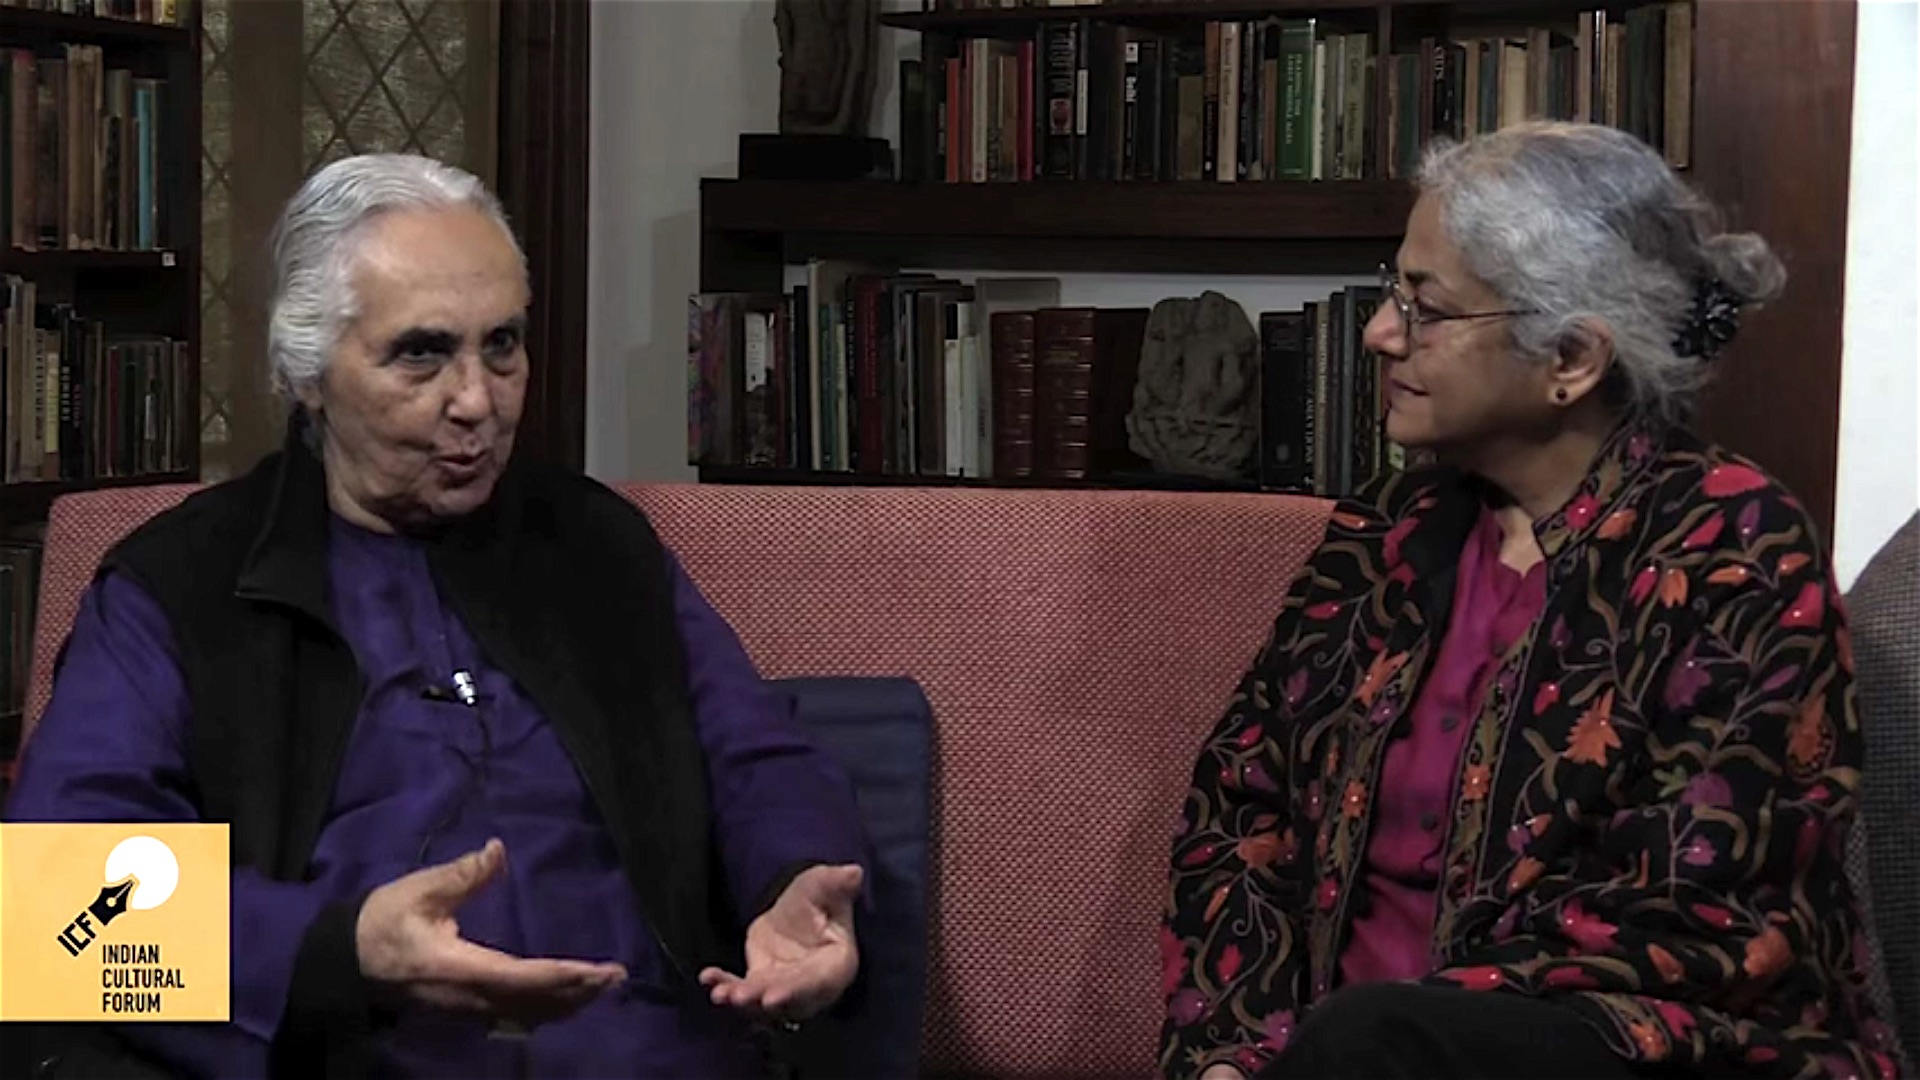 Romila Thapar: “The protests by JNU students and teachers have been remarkable . . .”